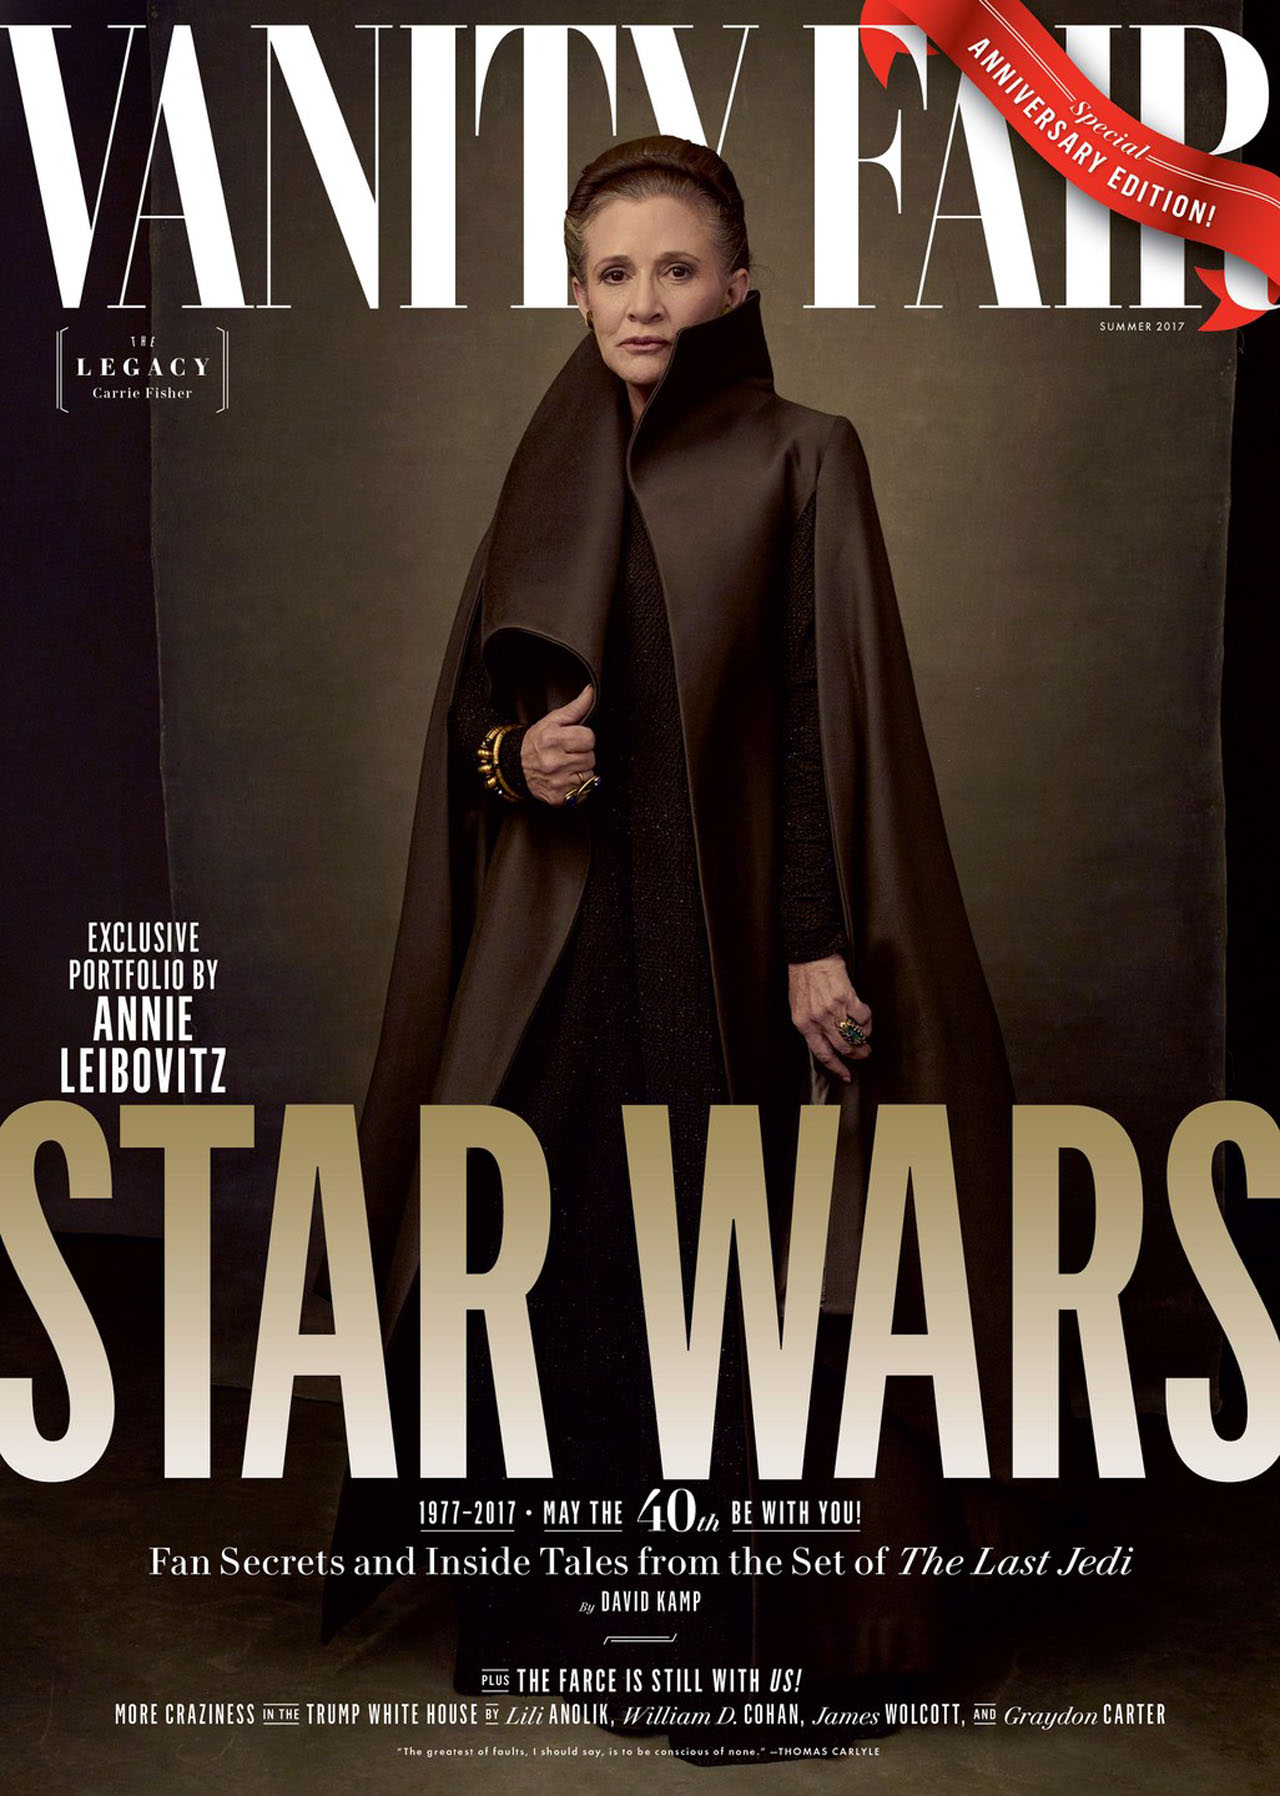 Carrie Fisher Star Wars: The Last Jedi Vanity Fair Cover